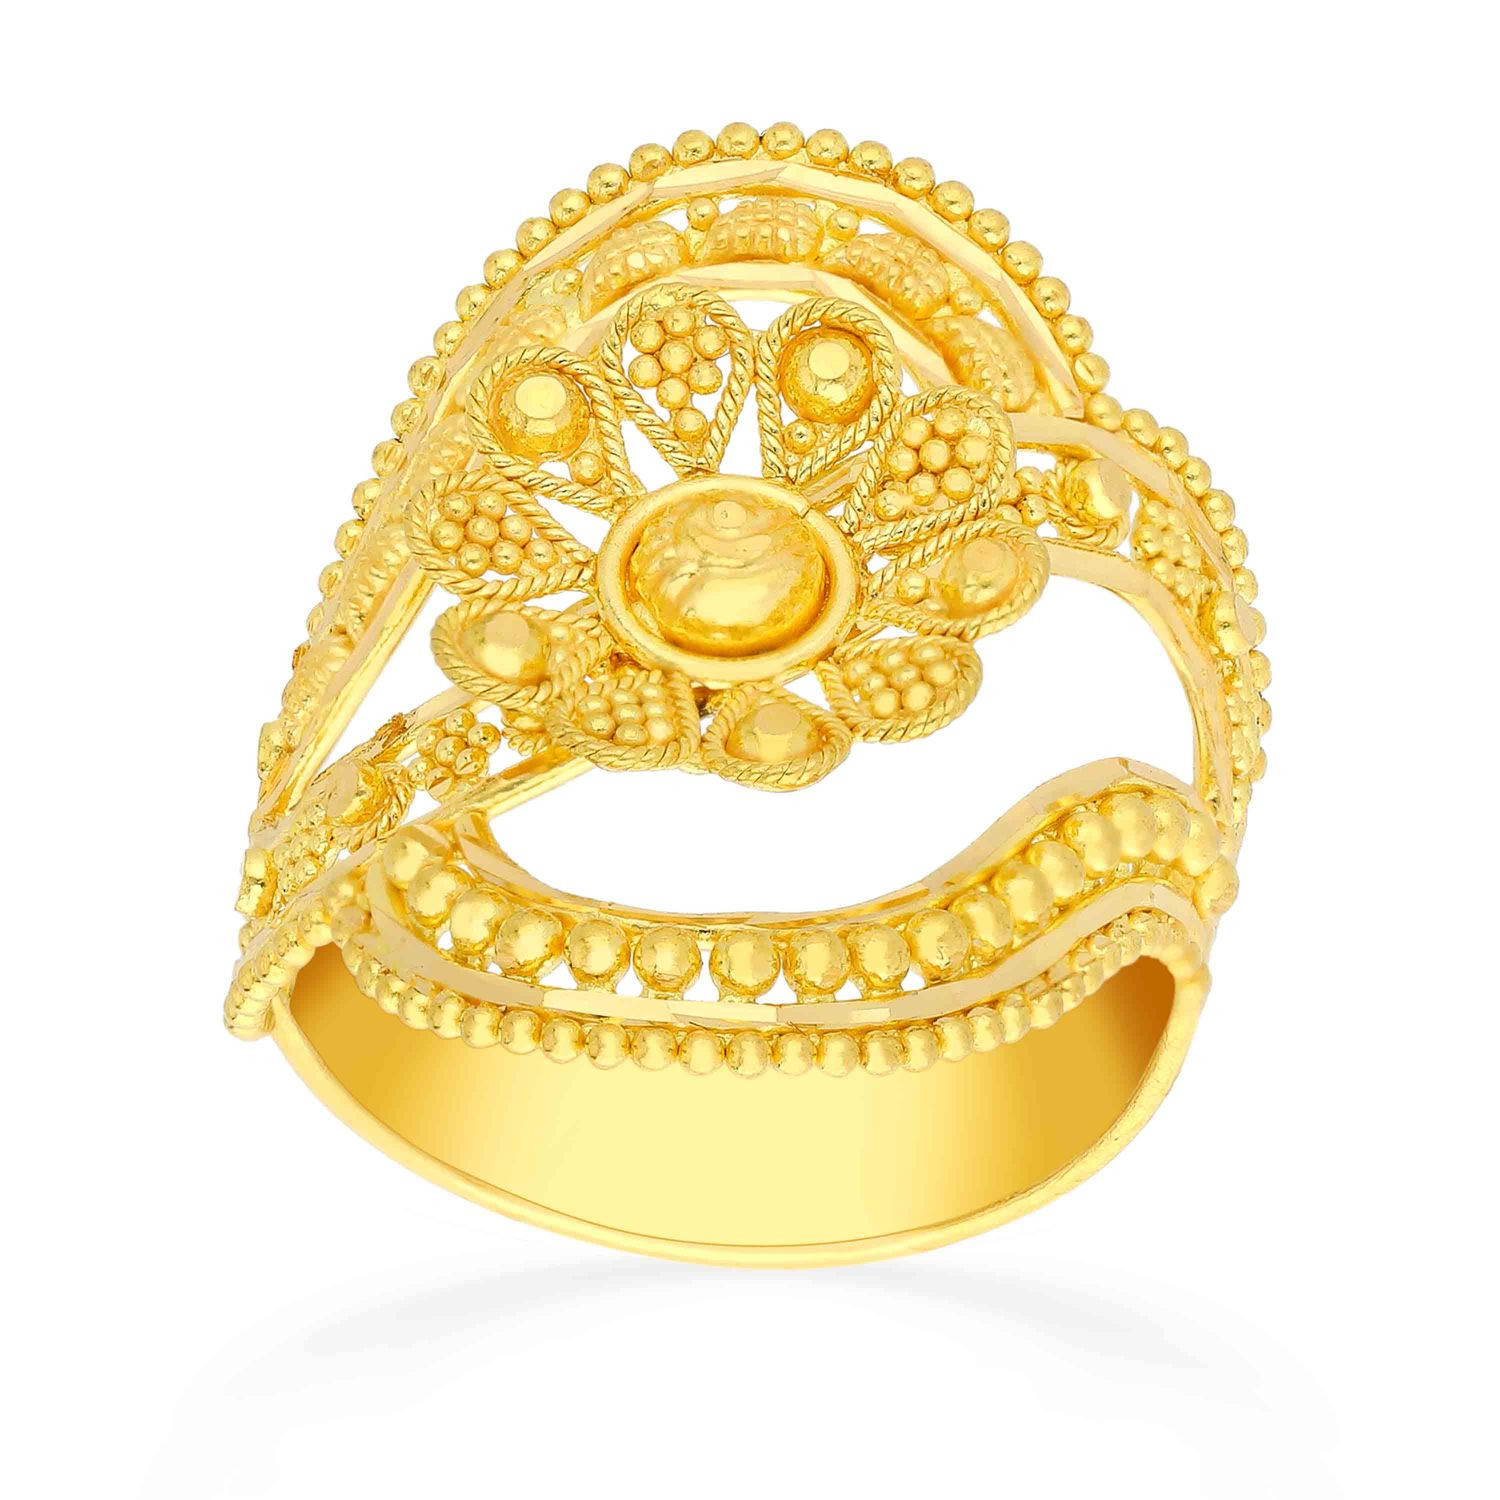 Temple Finish Flower Design Broad Finger Ring by Shree Radhe Pearls